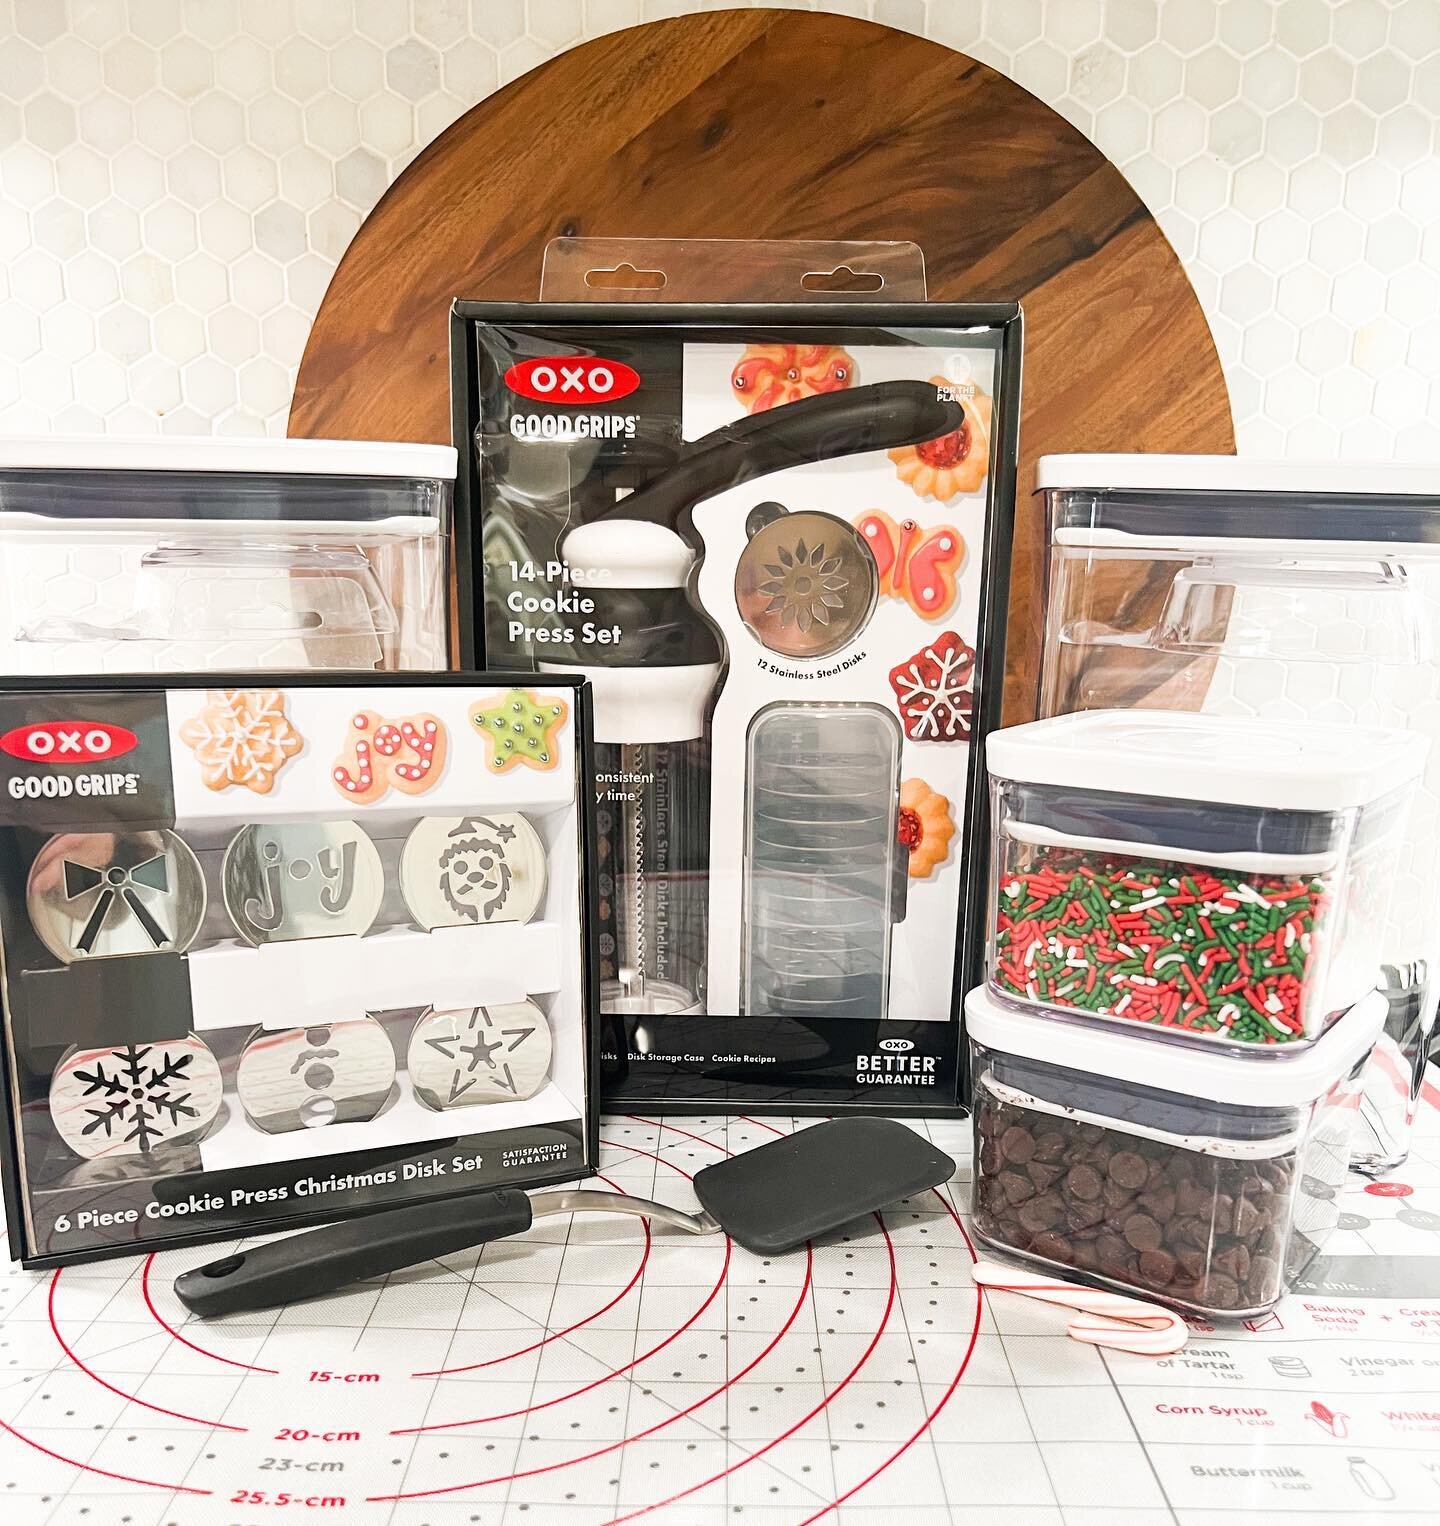 ✨ g i v e a w a y ✨ 
 We are giving one lucky winner this fun OXO holiday baking essentials set! 

✨What you get:
&bull; 8 piece pop container baking set
&bull; Silicone pastry mat 
&bull; Christmas cookie press disk set 
&bull; Silicone Spatula 
&bu